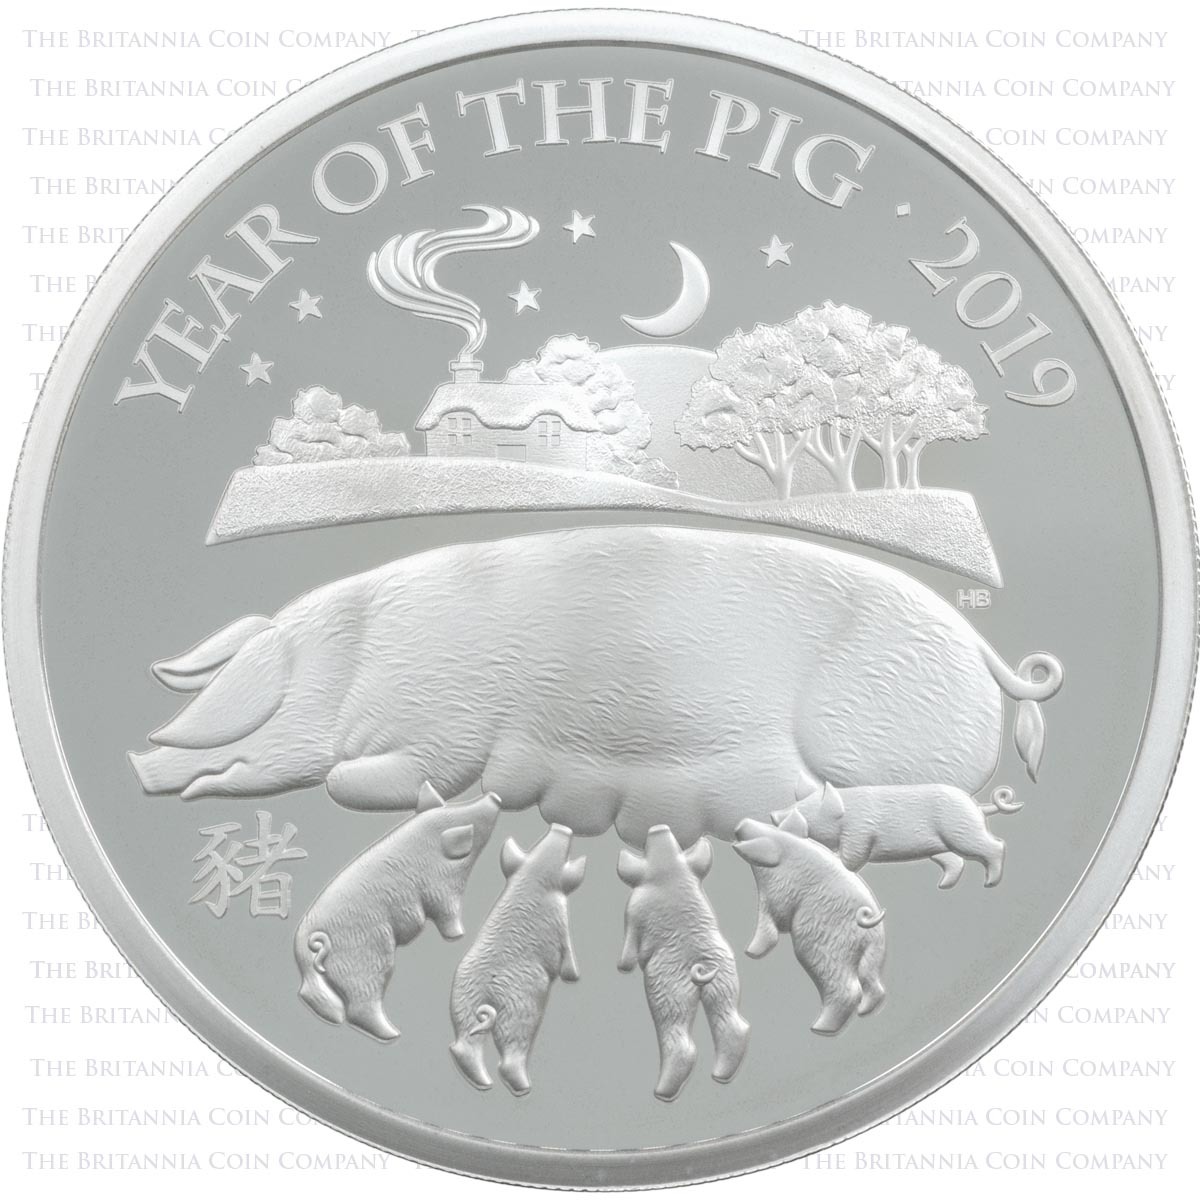 UKP19SP 2019 Lunar Year Of The Pig One Ounce Silver Proof Coin Reverse